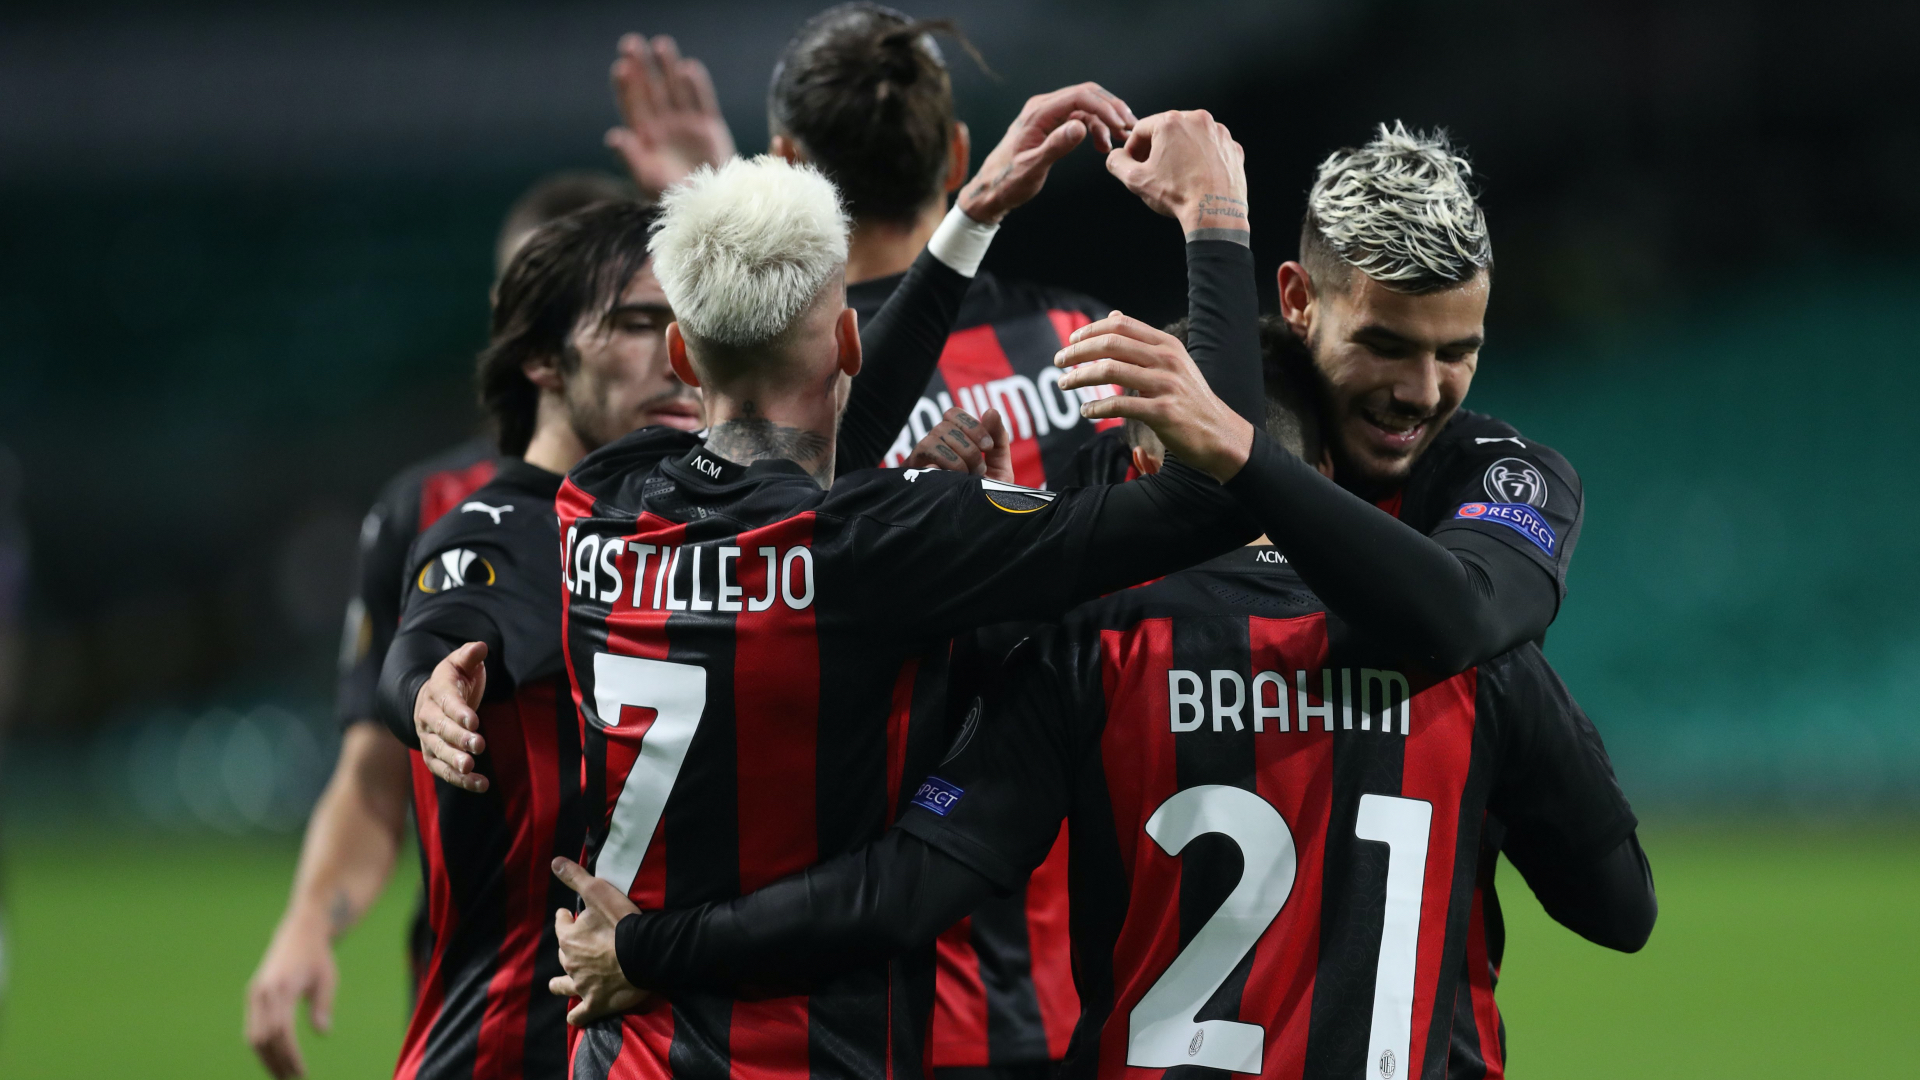 milan-sedicesimi-europa-league-2021-scommesse-sportive-giocate-online-Betaland-TheClover